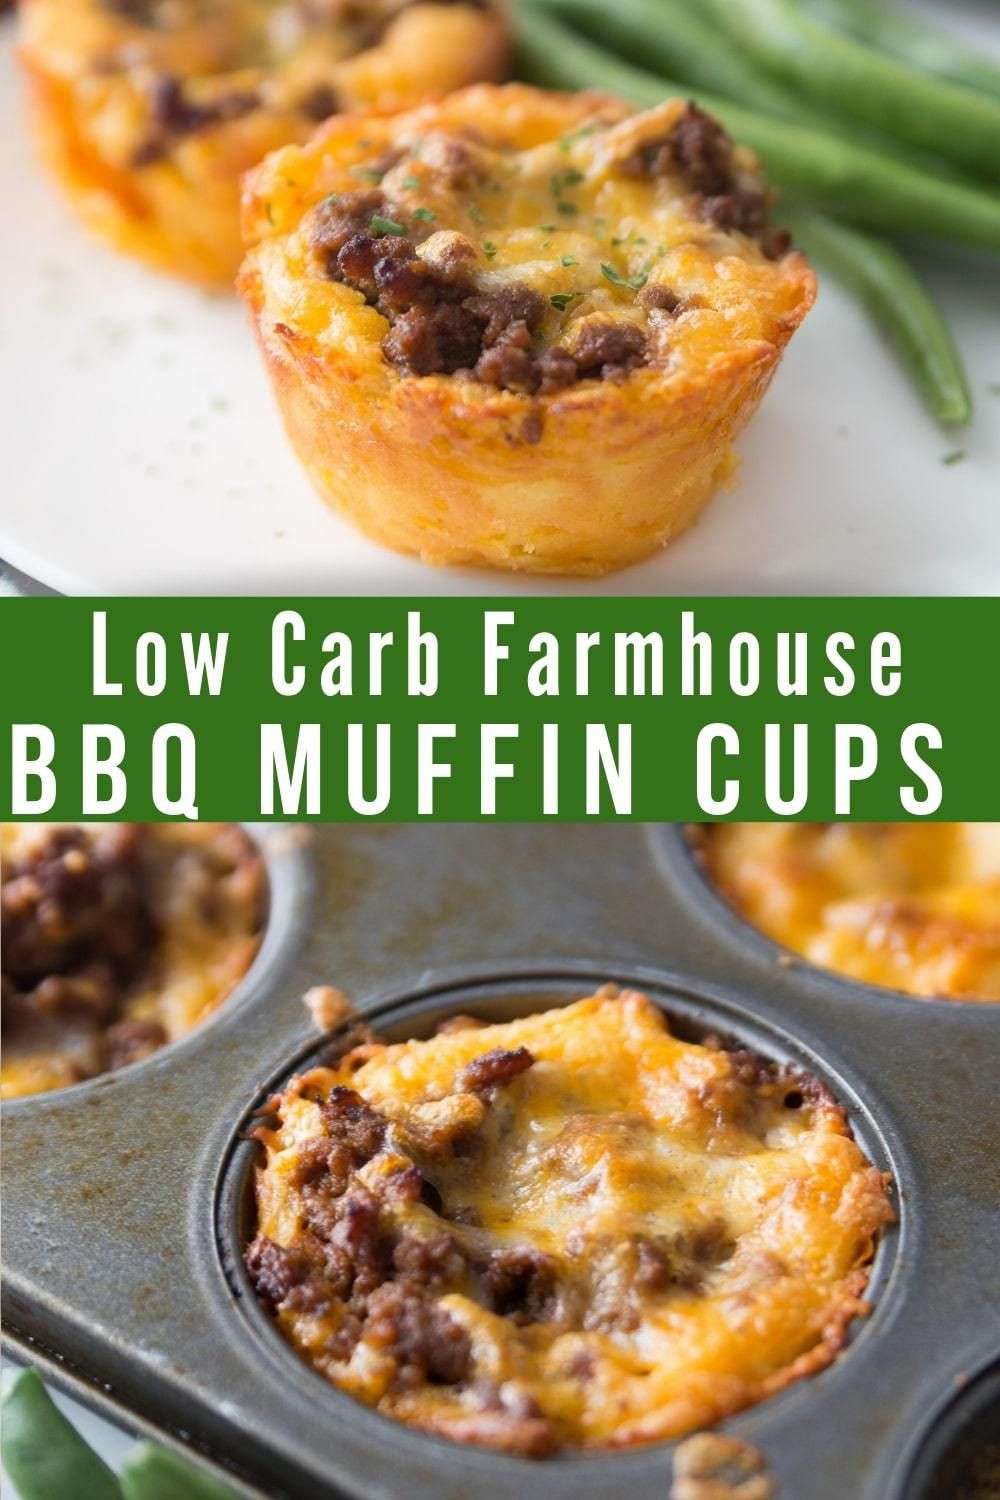 Low Carb Gourmet Recipes
 Quick & Easy Farmhouse BBQ Low Carb Muffin Cups keto low